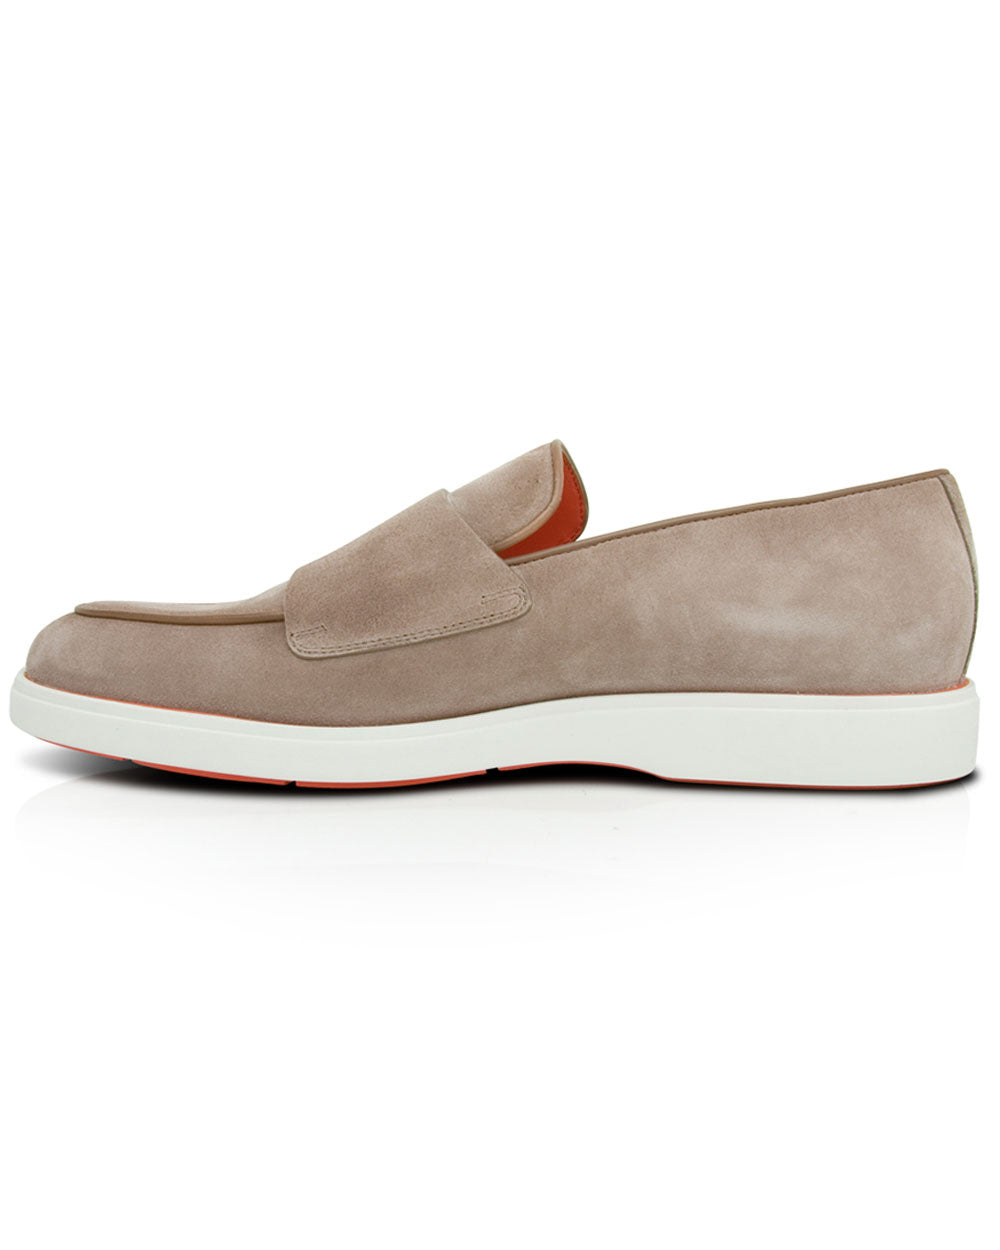 Drafts Double Monk Strap Loafer in Light Brown